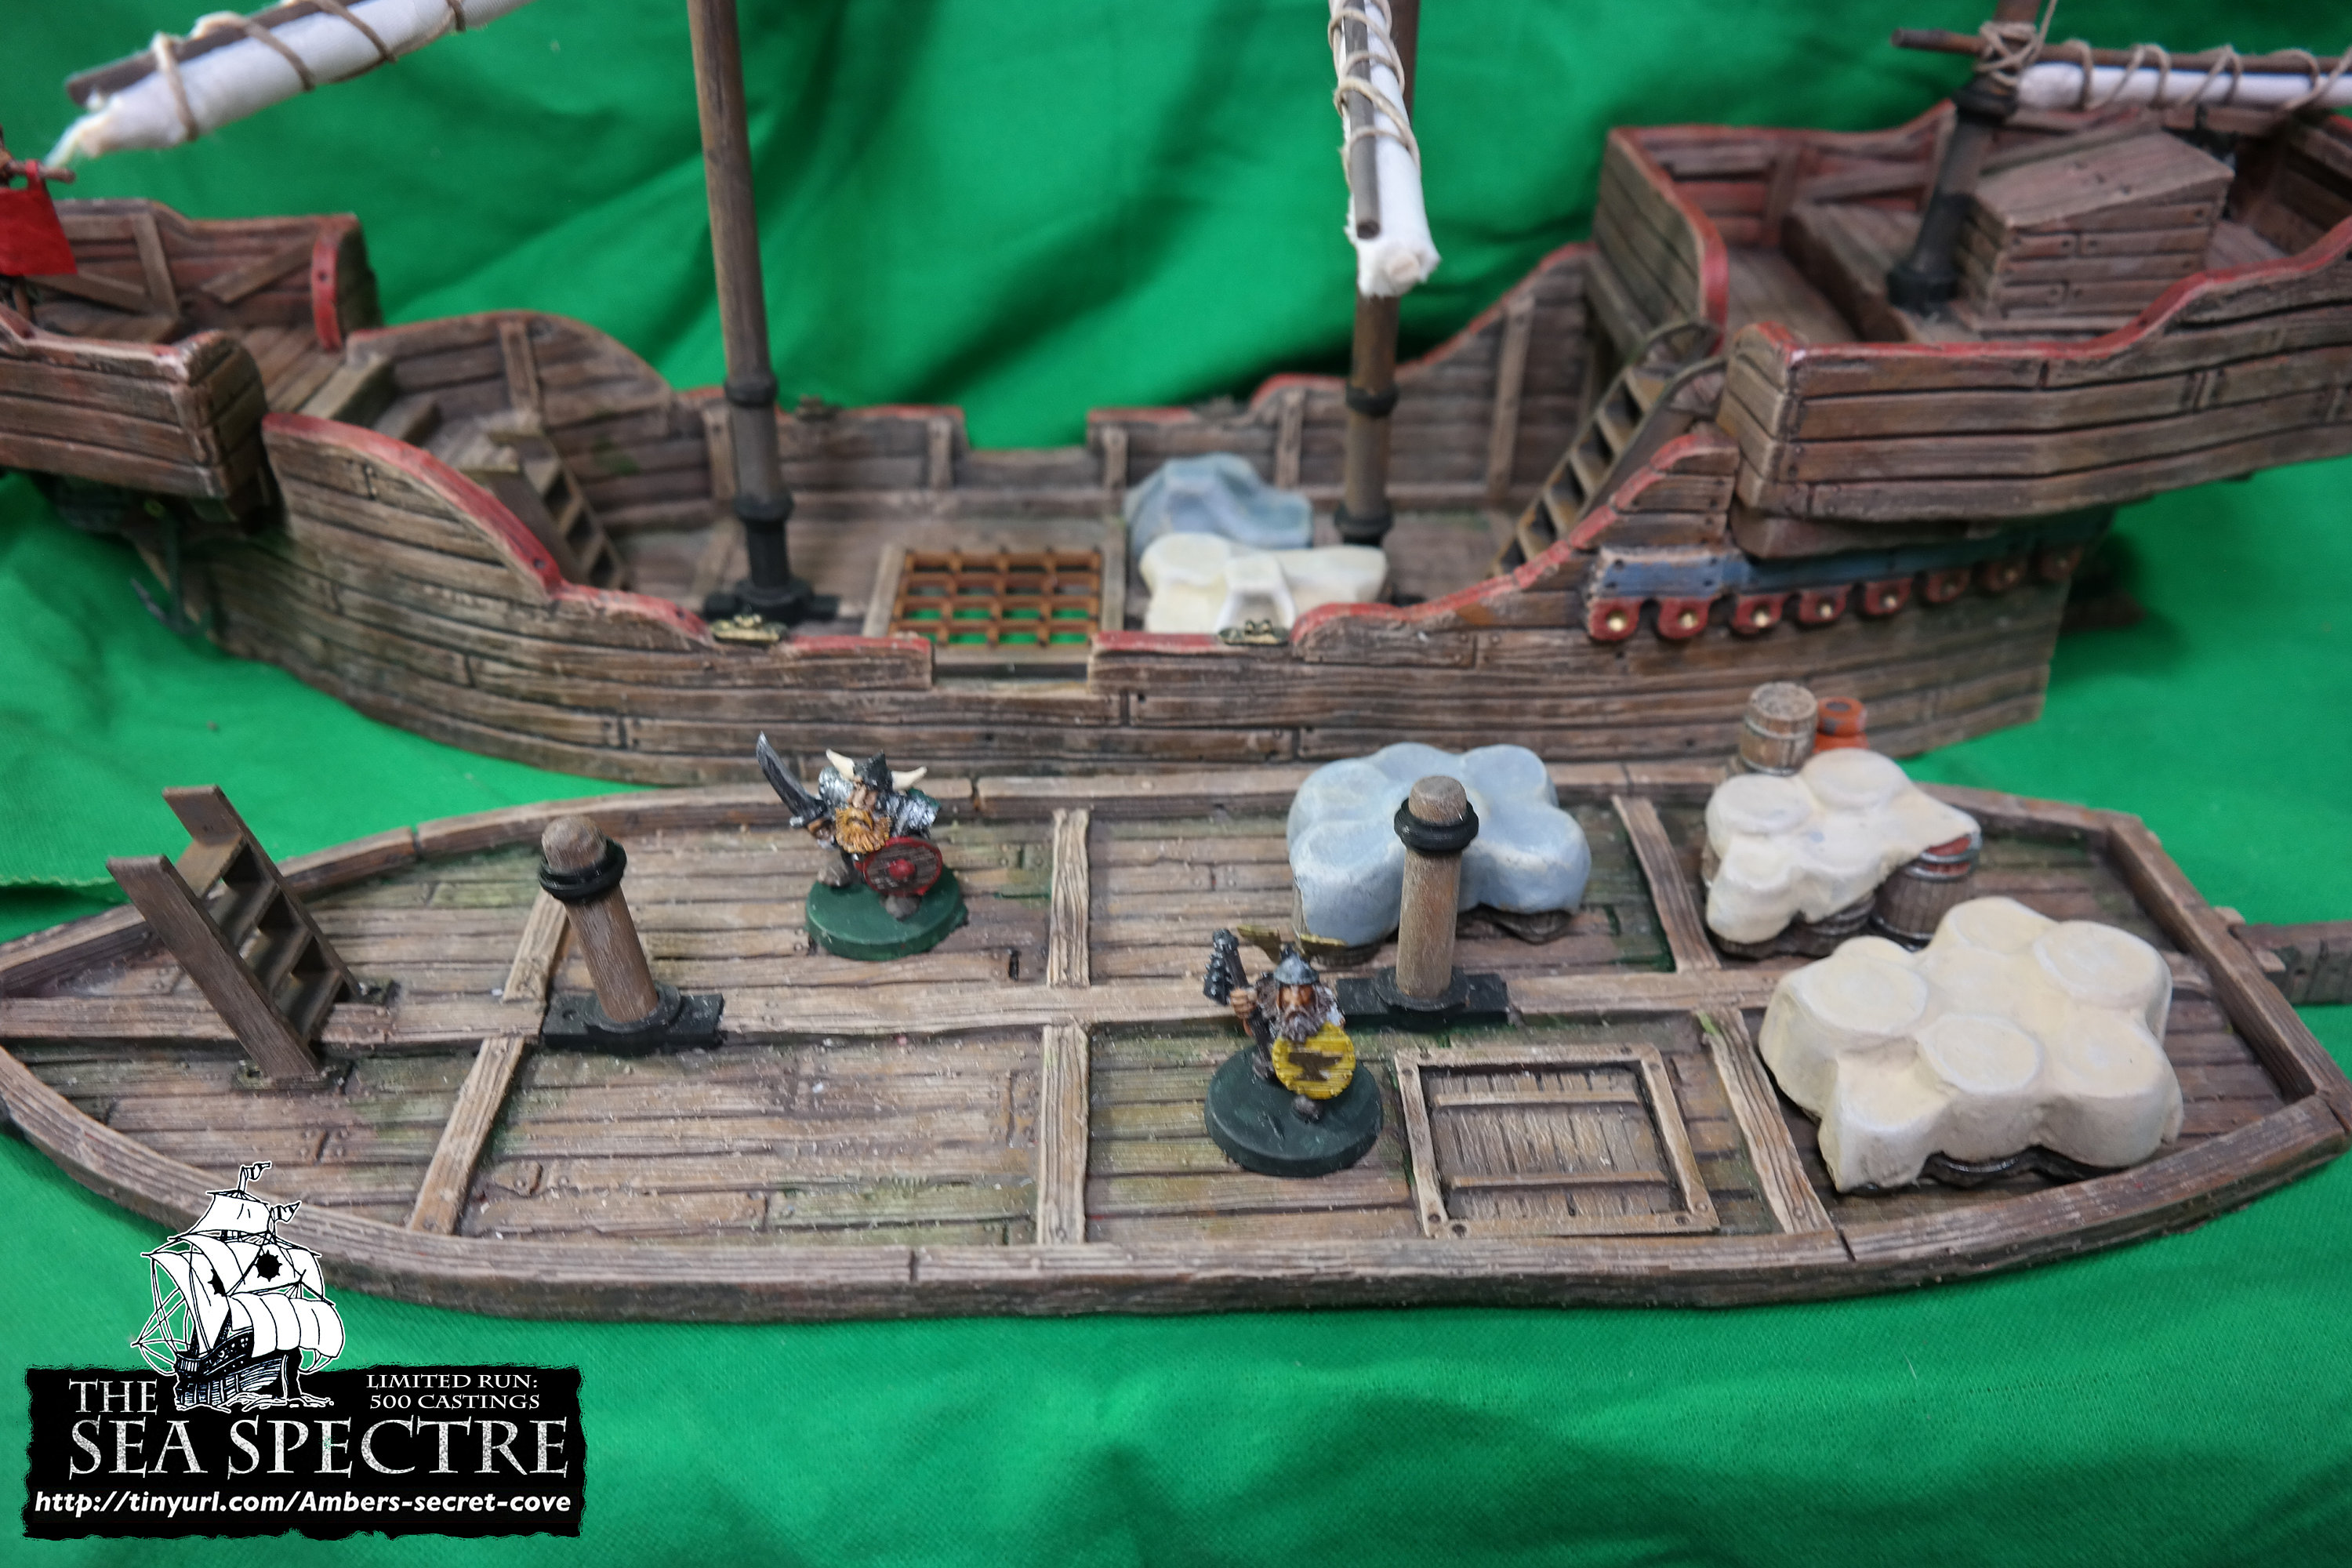 The Sea Spectre Bundle With Lower Deck 28mm Tabletop Sailing - Etsy Canada